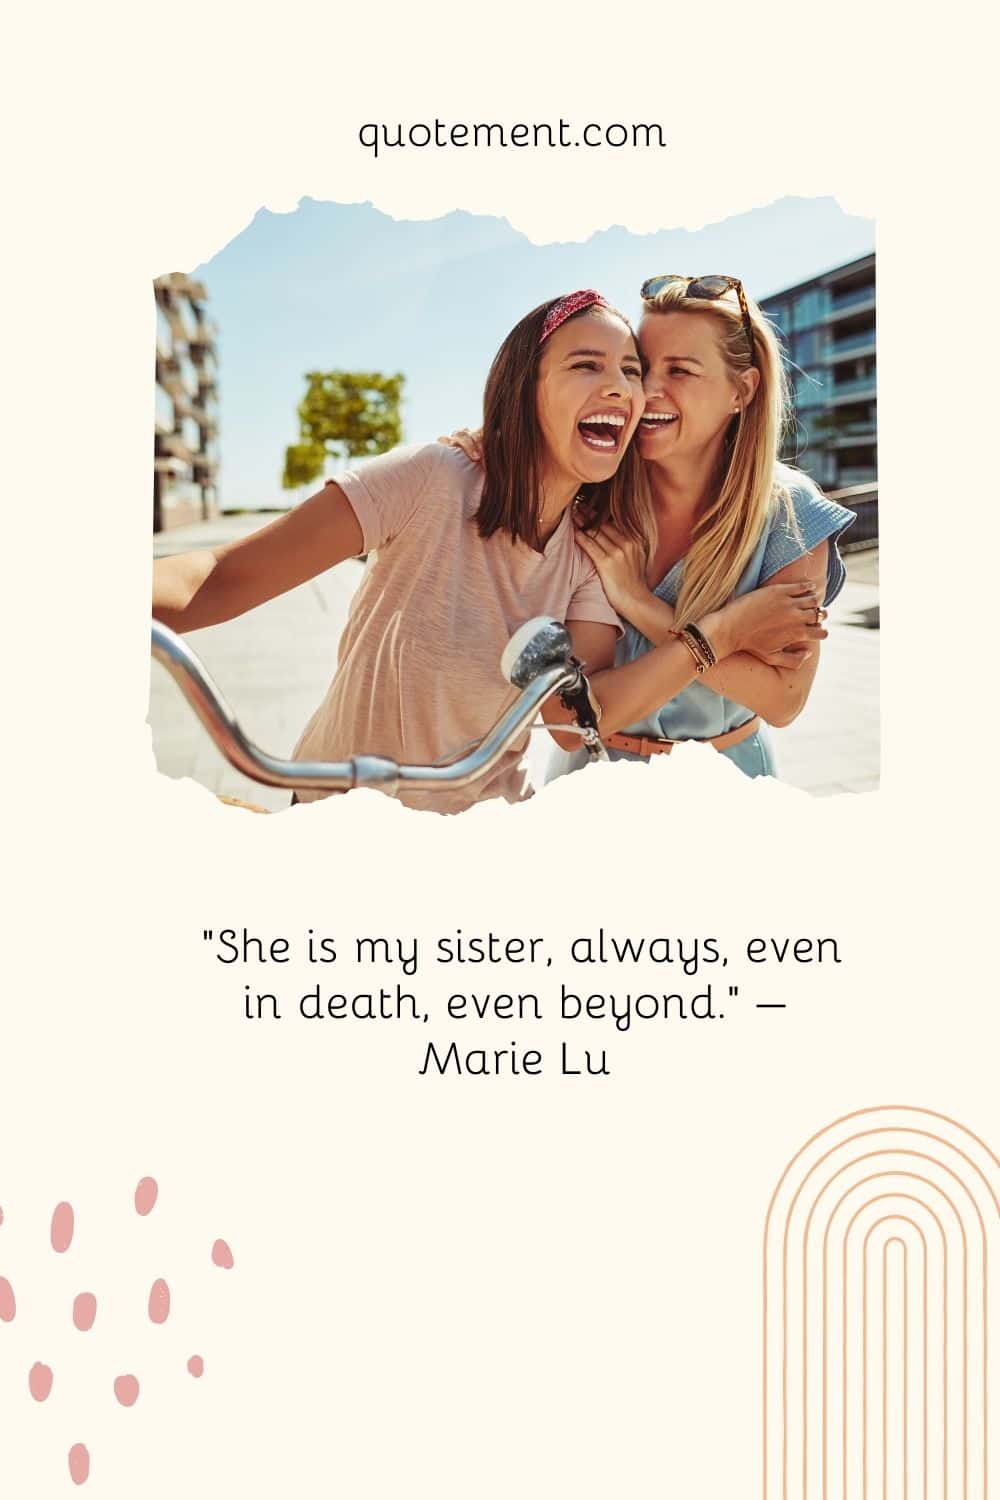 “She is my sister, always, even in death, even beyond.” – Marie Lu